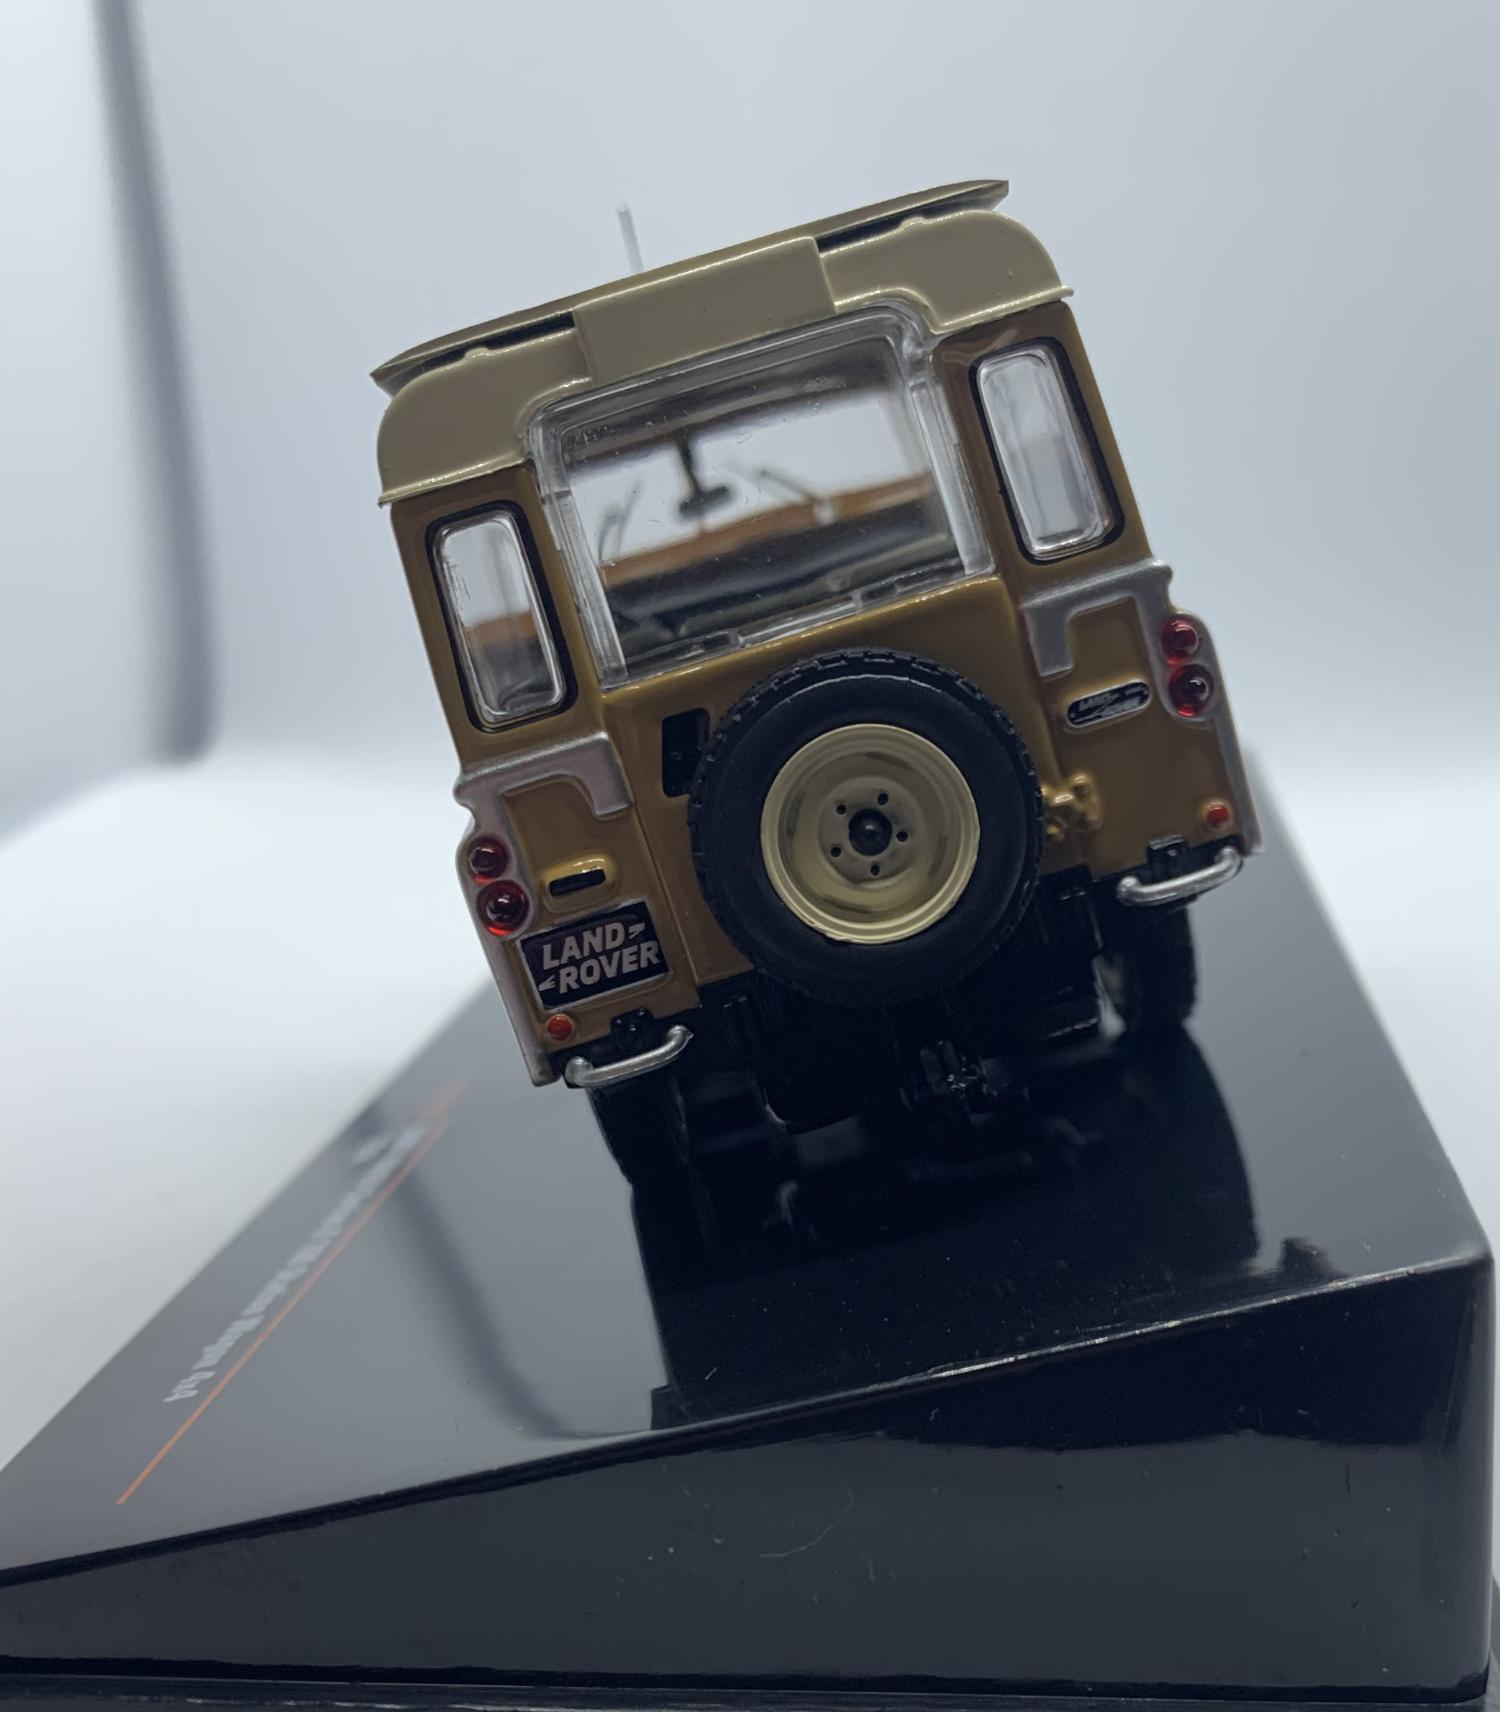 Land Rover Series 2 109 Station Wagon 1958 in beige, 1:43 scale model from IXO